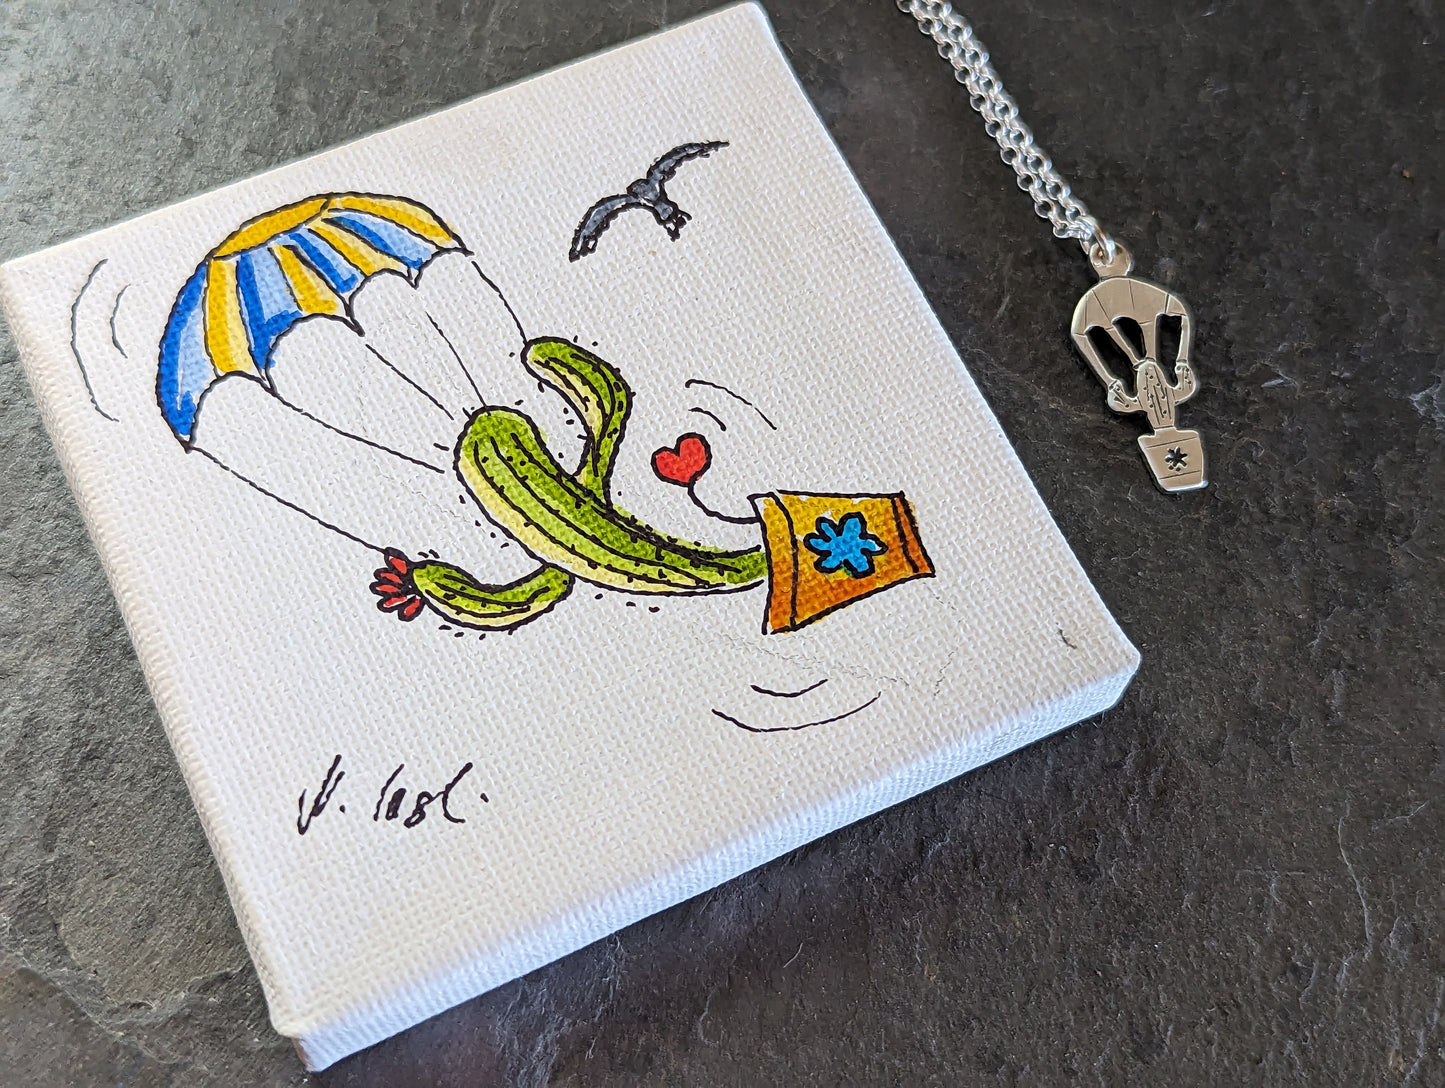 tiny silver parachuting cactus and mini drawing of cactus on parachute on stretched canvas ( Original art )